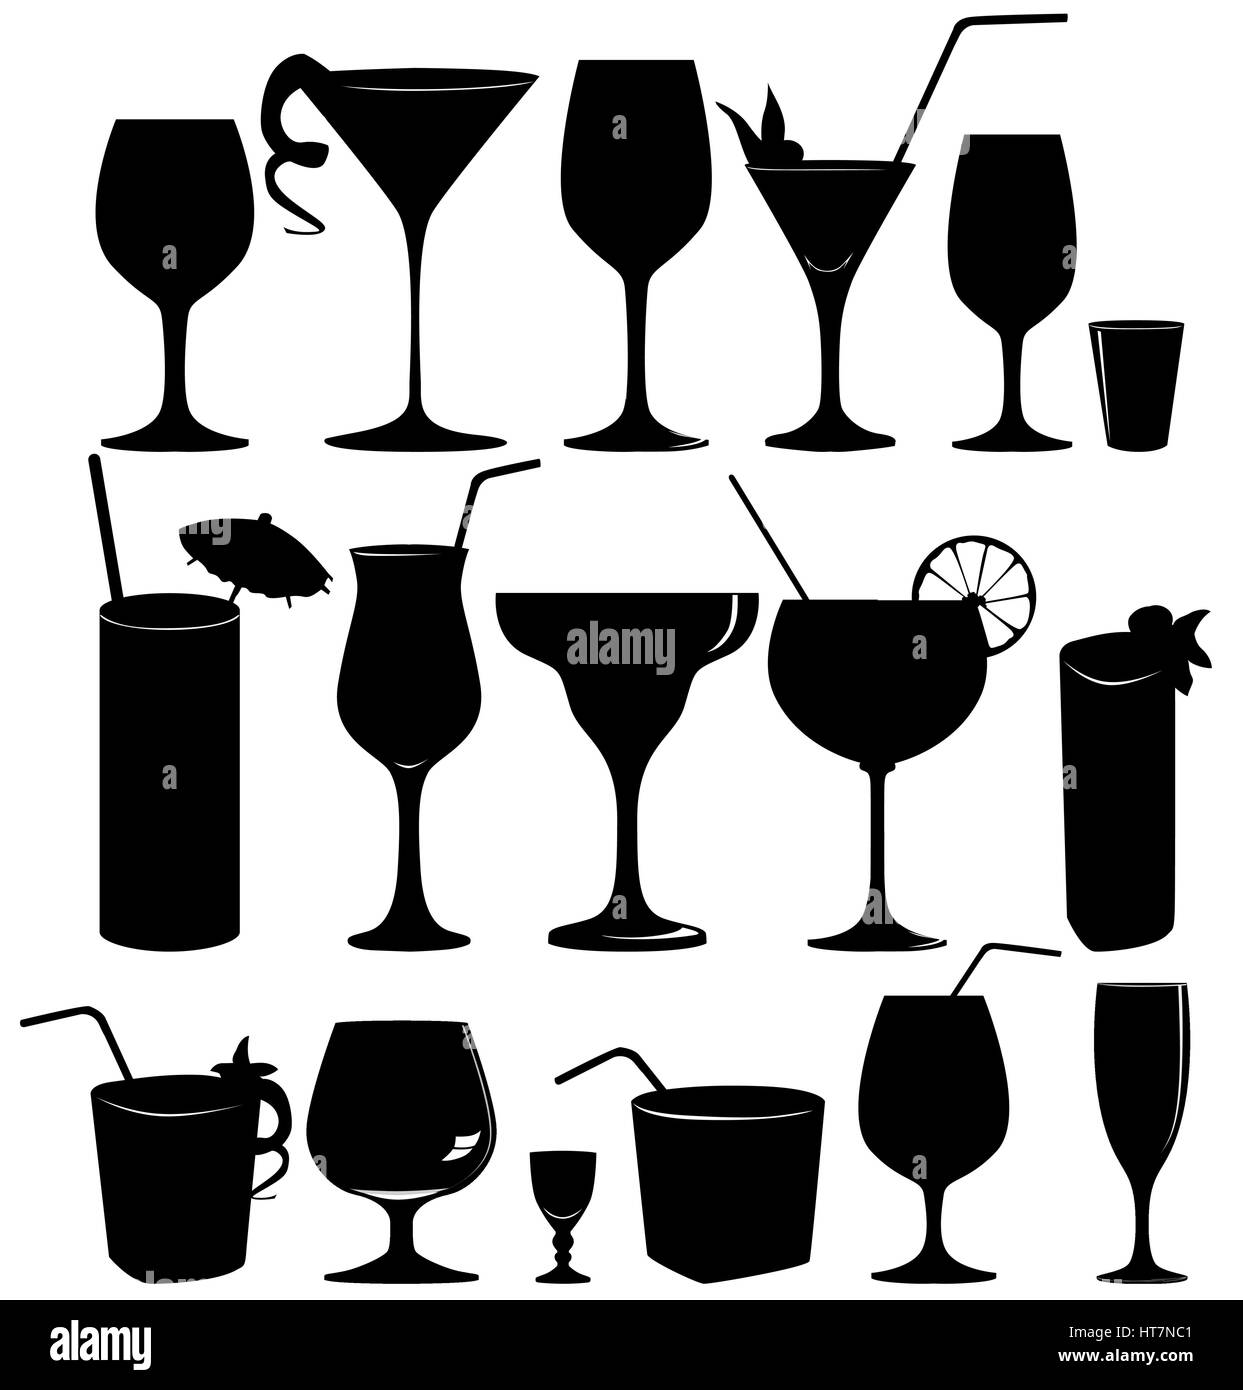 https://c8.alamy.com/comp/HT7NC1/cocktail-wineglass-silhouette-sign-cocktail-drink-glass-set-HT7NC1.jpg